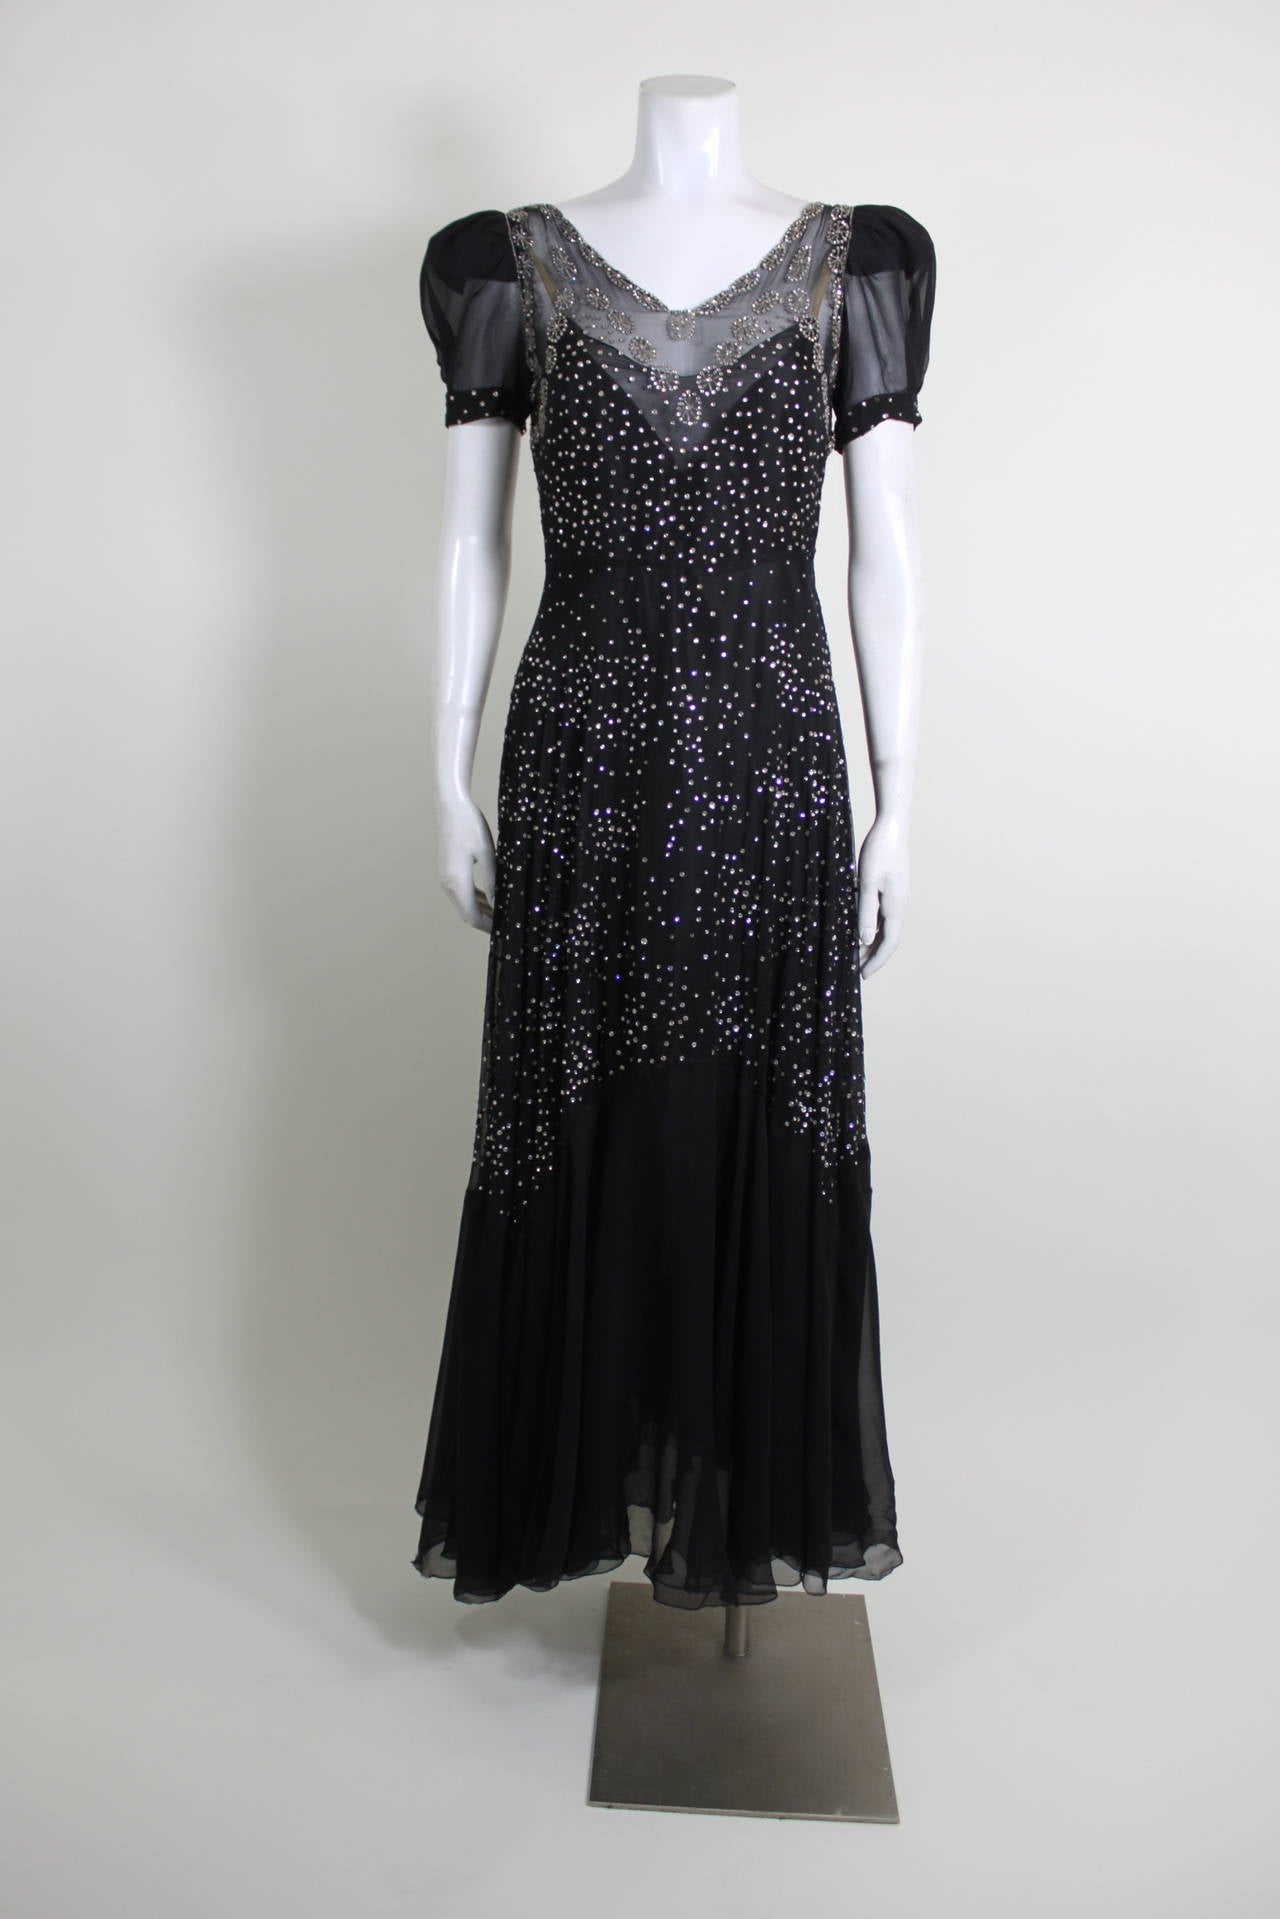 An insanely gorgeous, sparkling bias cut gown from the 1930s. Done in a lightweight black chiffon, the gown is covered in prong-set rhinestones in starburst patterns. Princess sleeves are given a modern silhouette with a chic structured cut. The